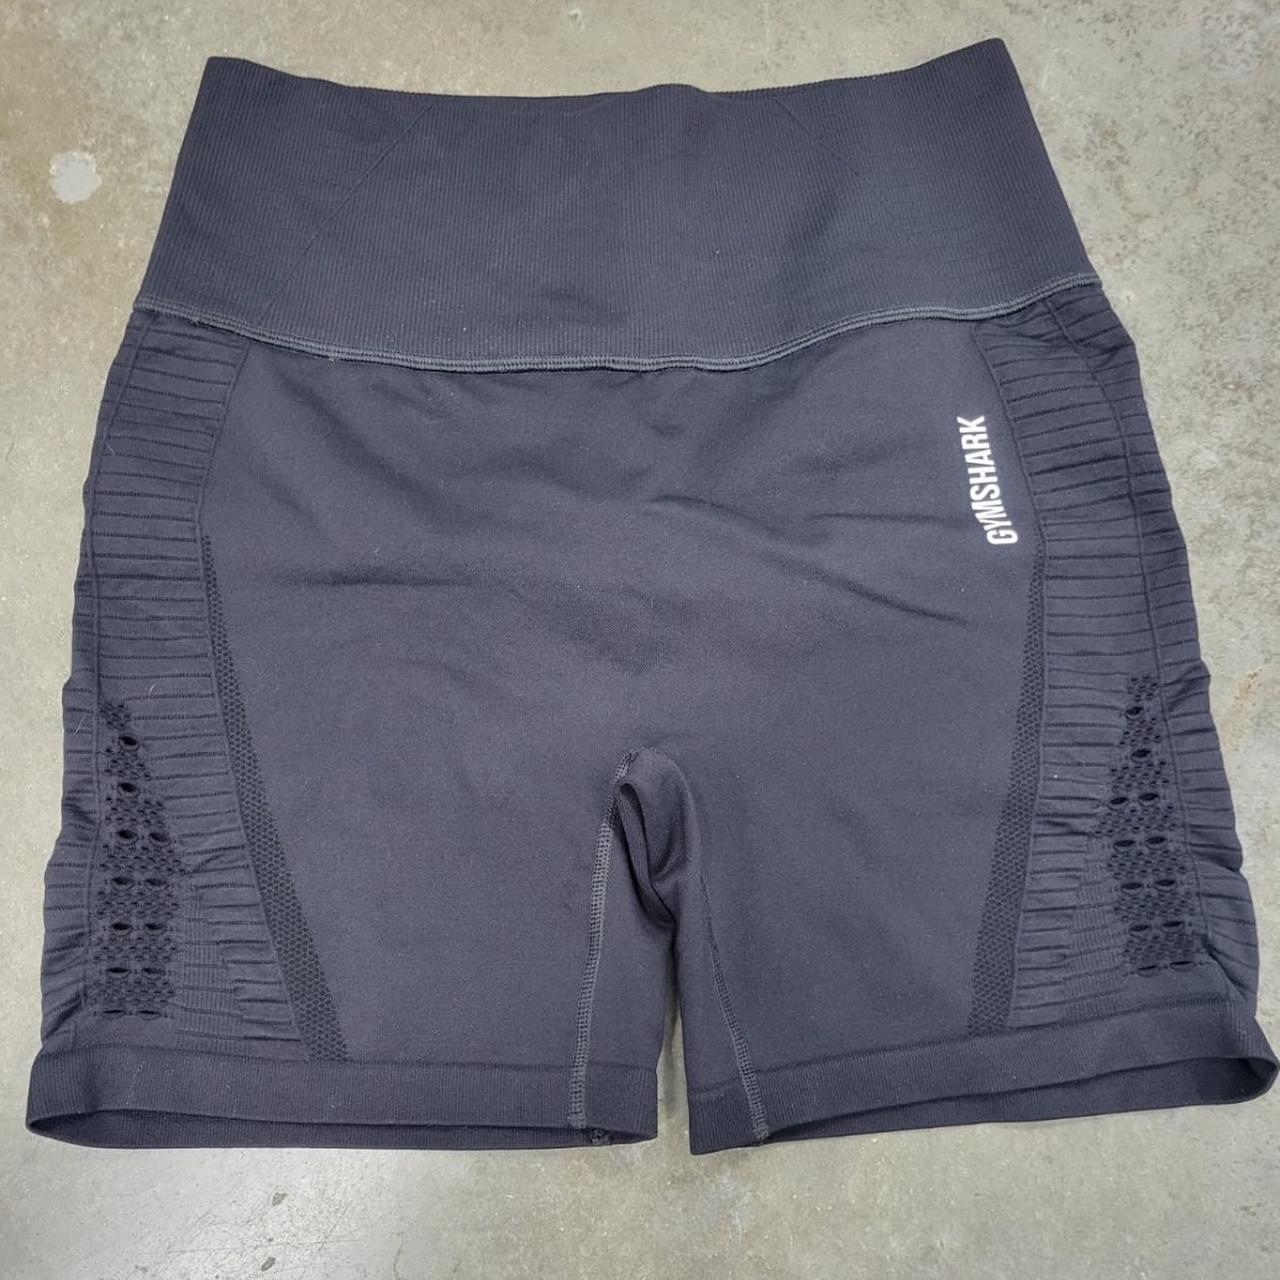 Youngla Shorts These Navy shorts include one zipper - Depop